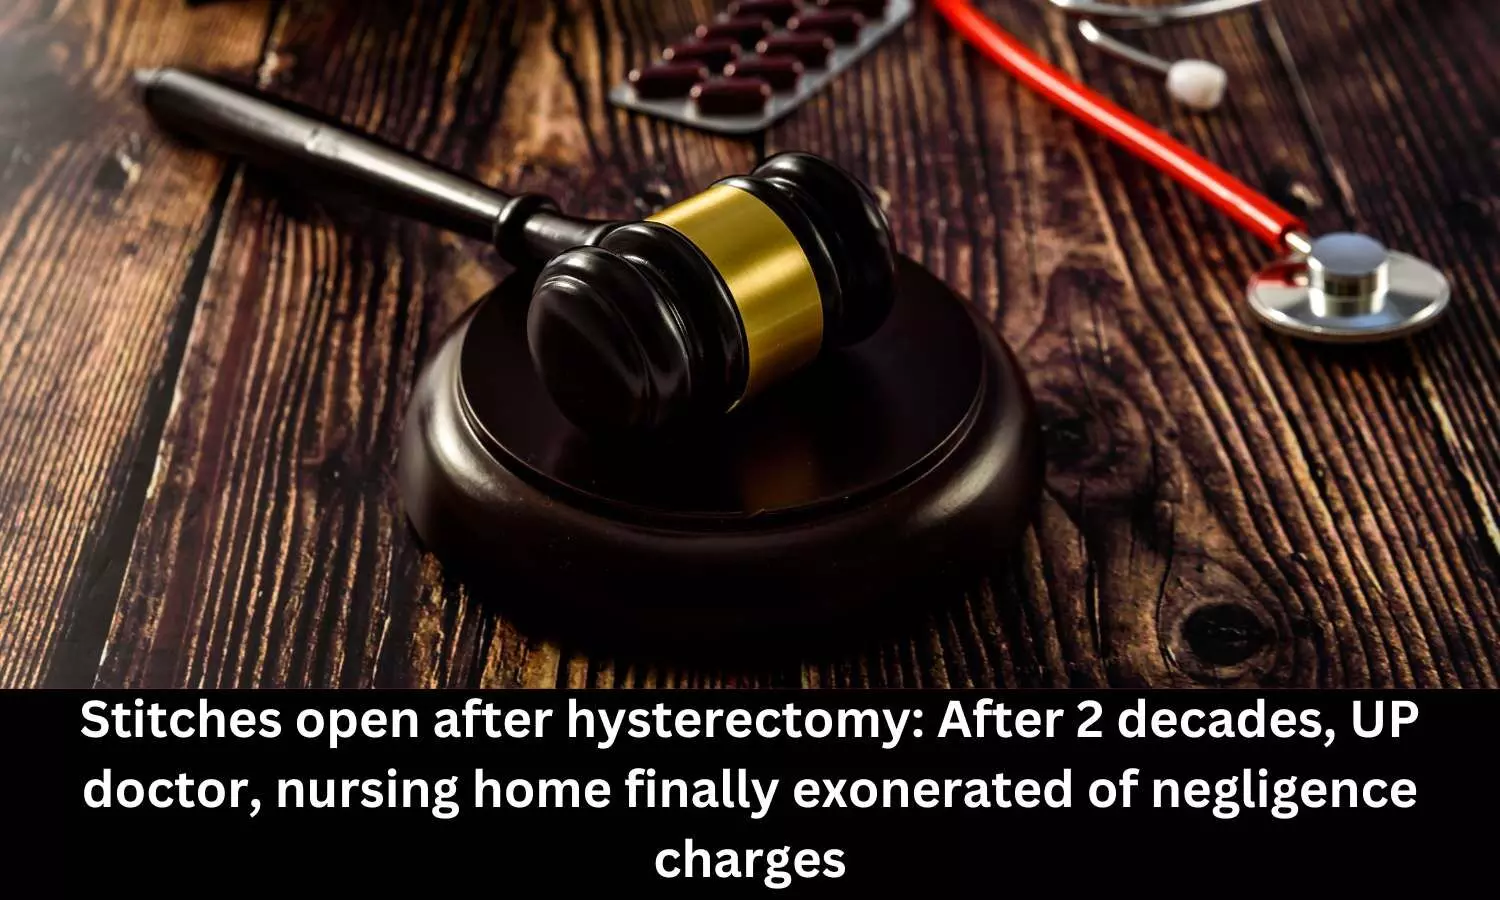 Stitches open after hysterectomy: NCDRC exonerates UP doctor, nursing home from allegations of negligence